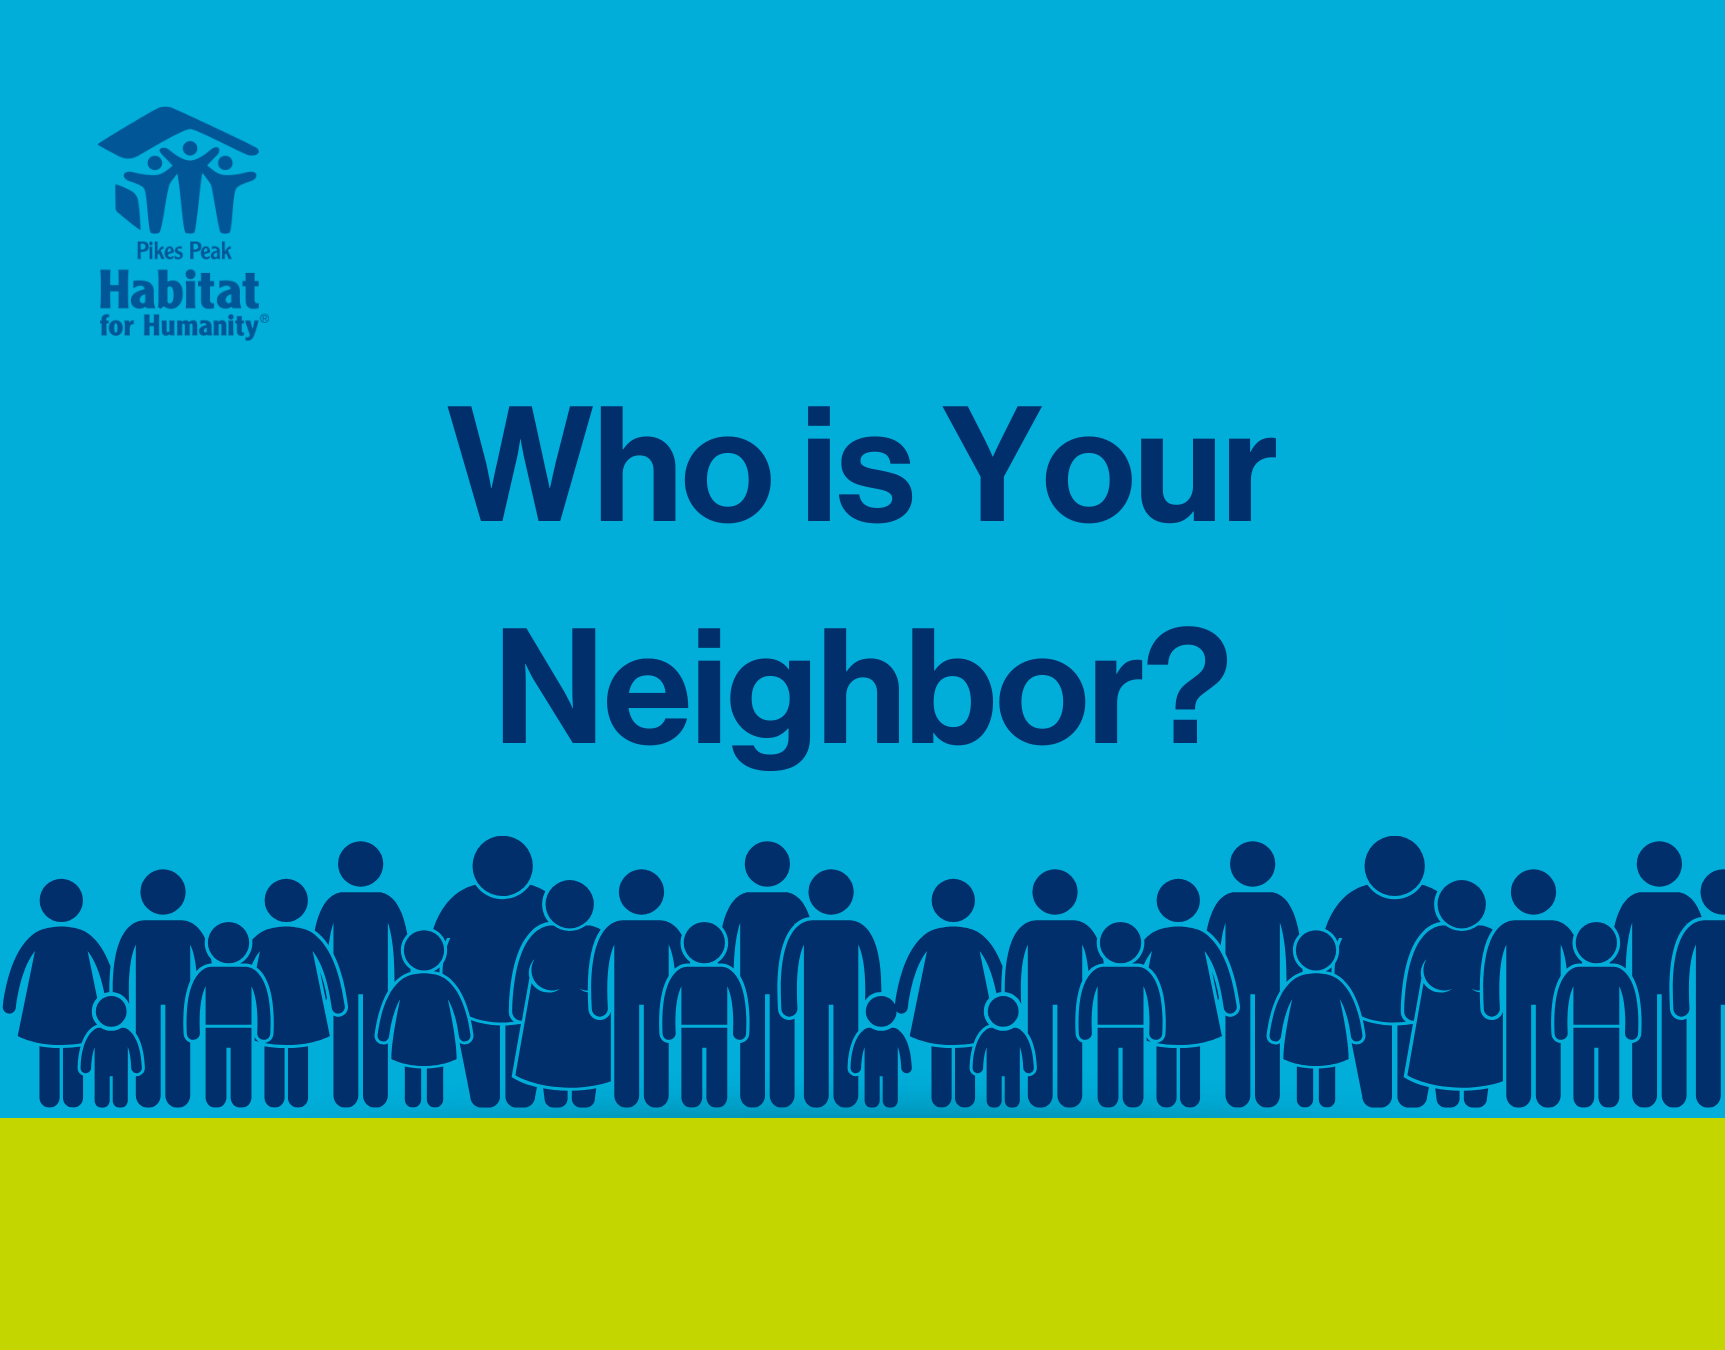 Who is your neighbor? showing silhouettes of people